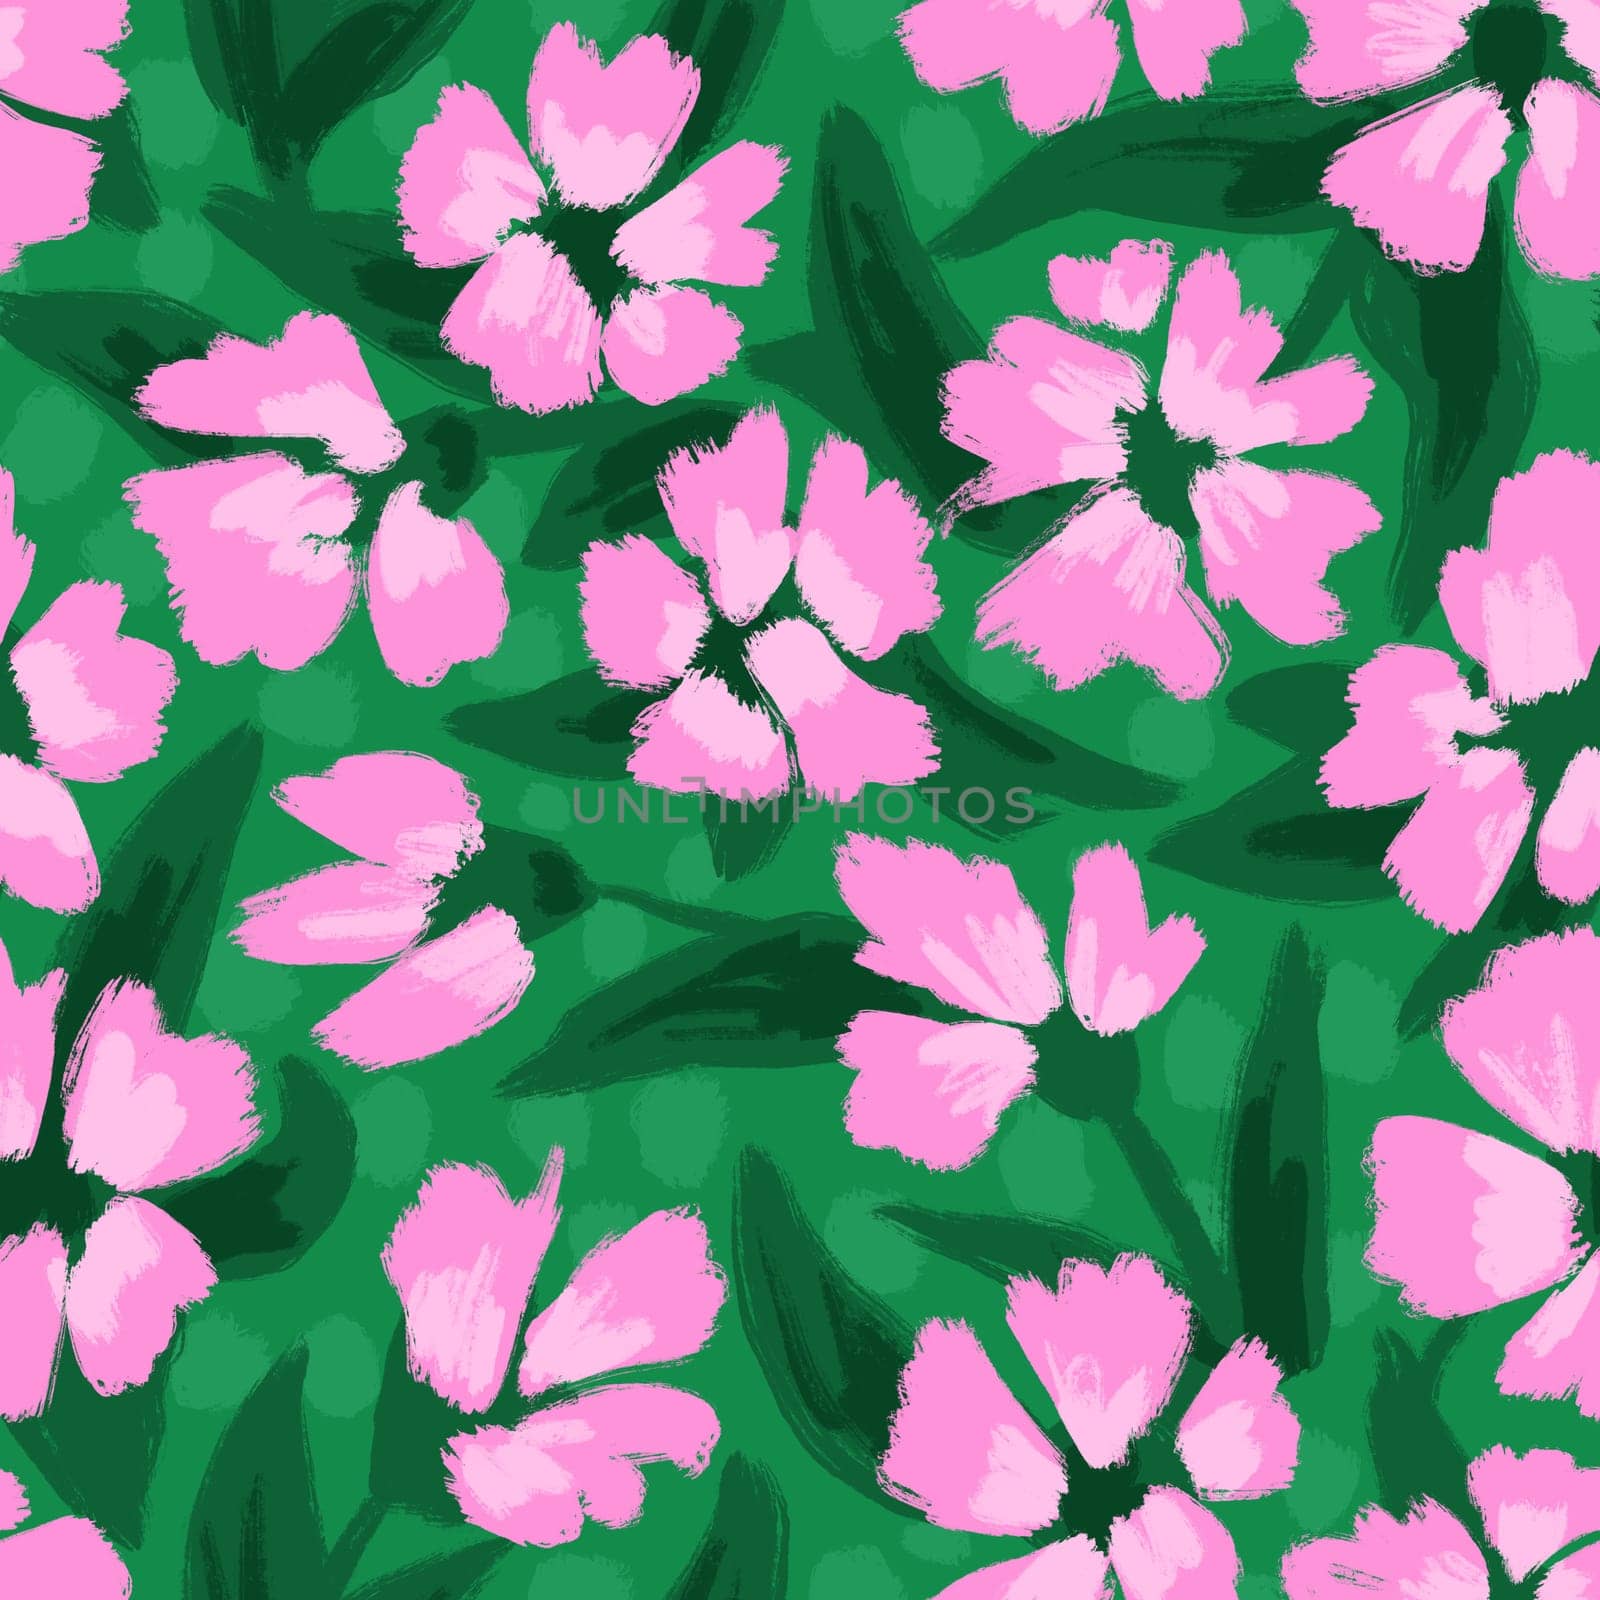 Hand drawn seamless pattern with pink green shabby chic flower floral elements lines dots leaves, ditsy summer spring botanical nature print, bloom blossom stylized petals. by Lagmar